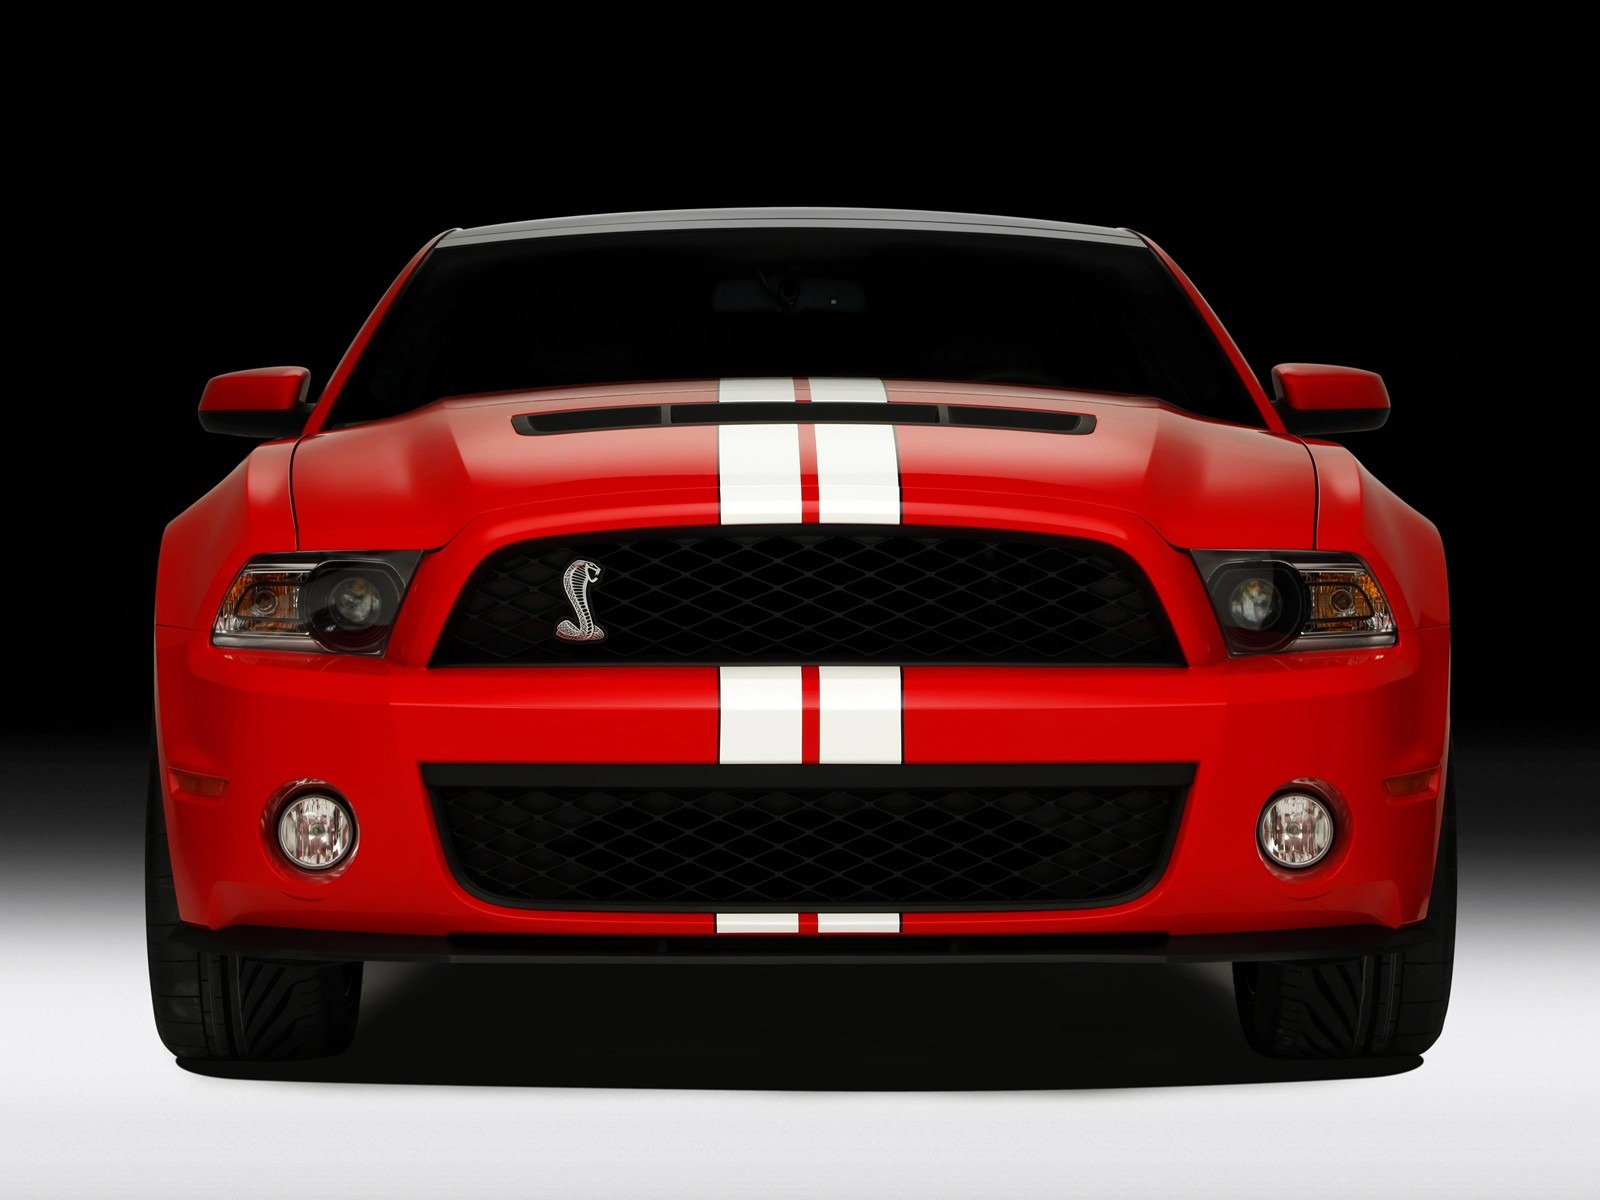 Ford Mustang GT500 Wallpapers #5 - 1600x1200